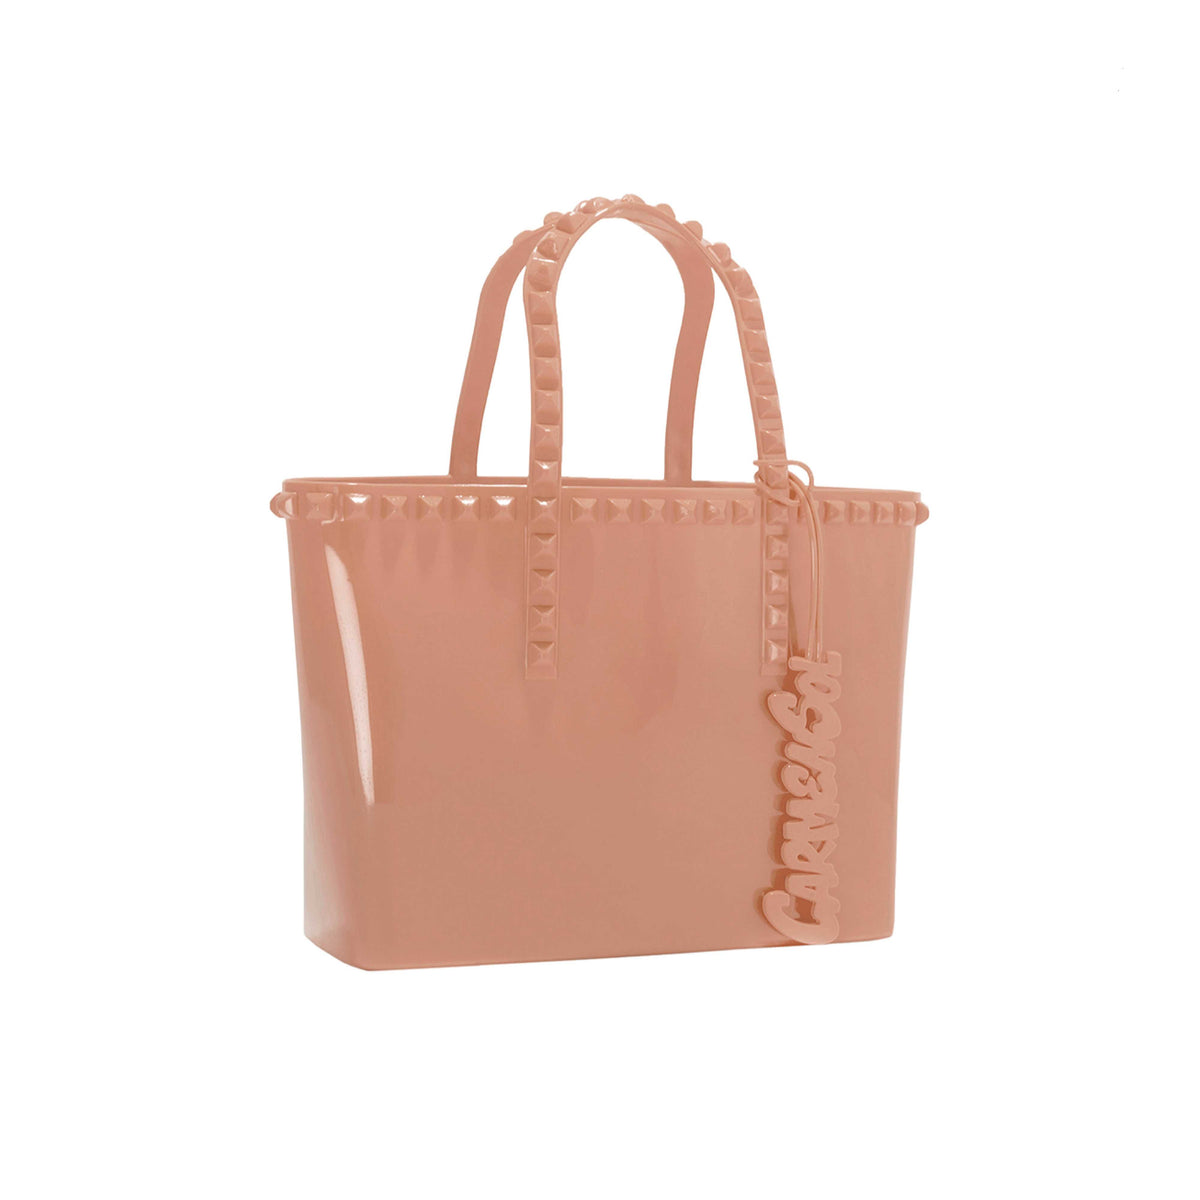 Nude mini tote bag with studs from Carmen Sol for the kids